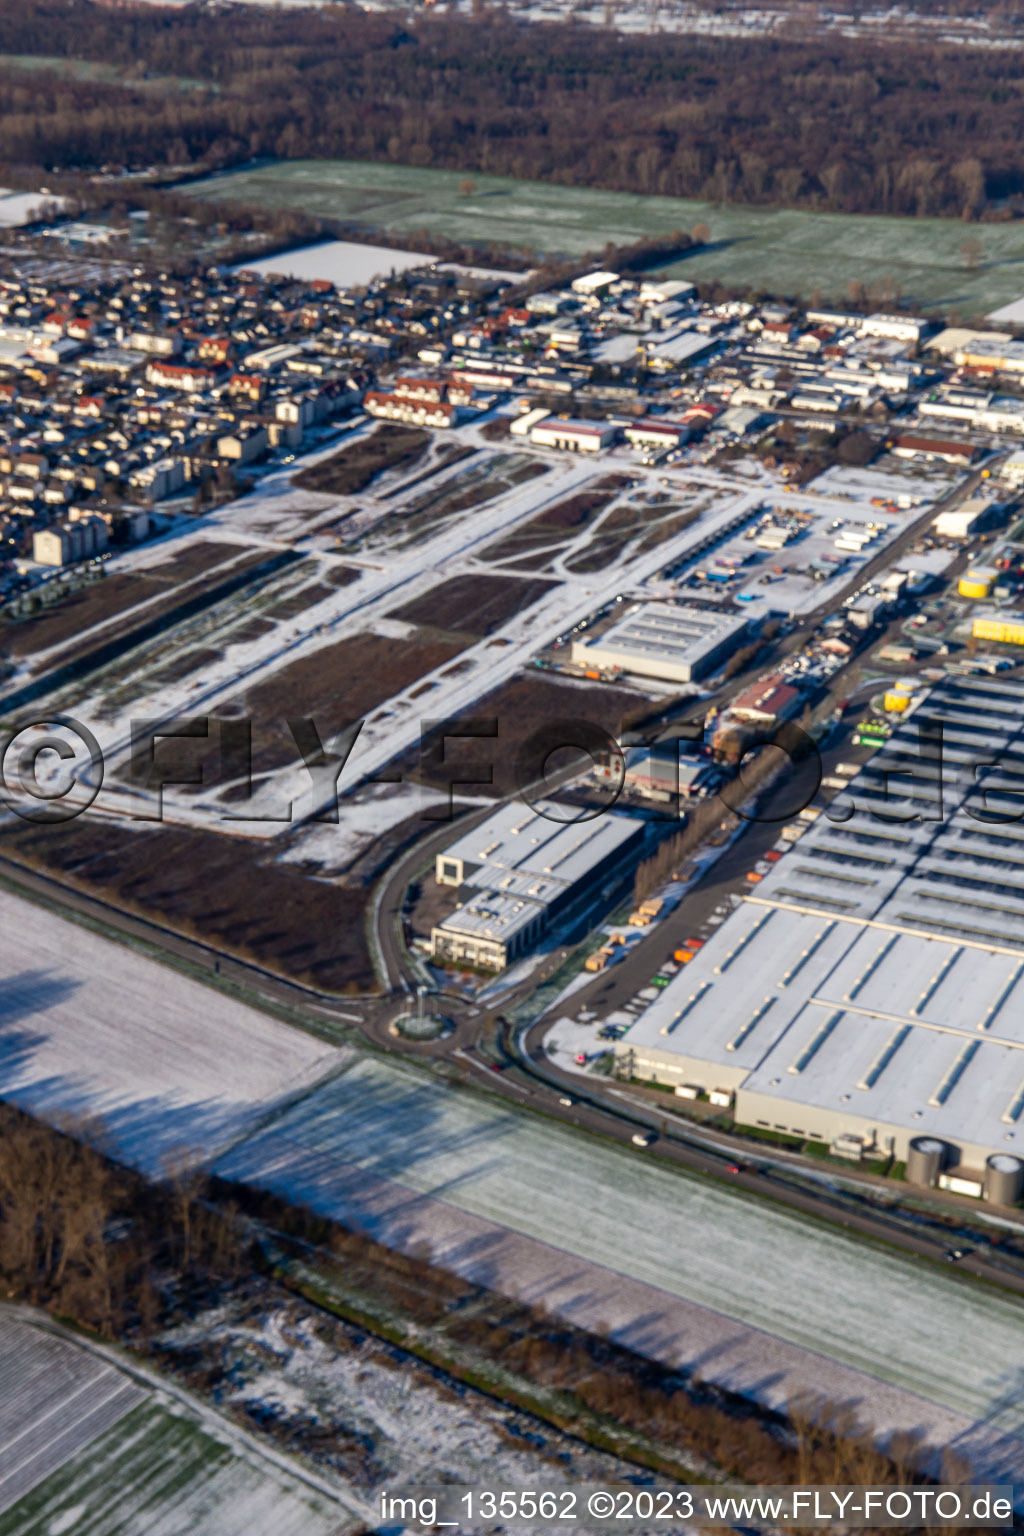 Aerial photograpy of Interpark industrial area in winter with snow in Offenbach an der Queich in the state Rhineland-Palatinate, Germany